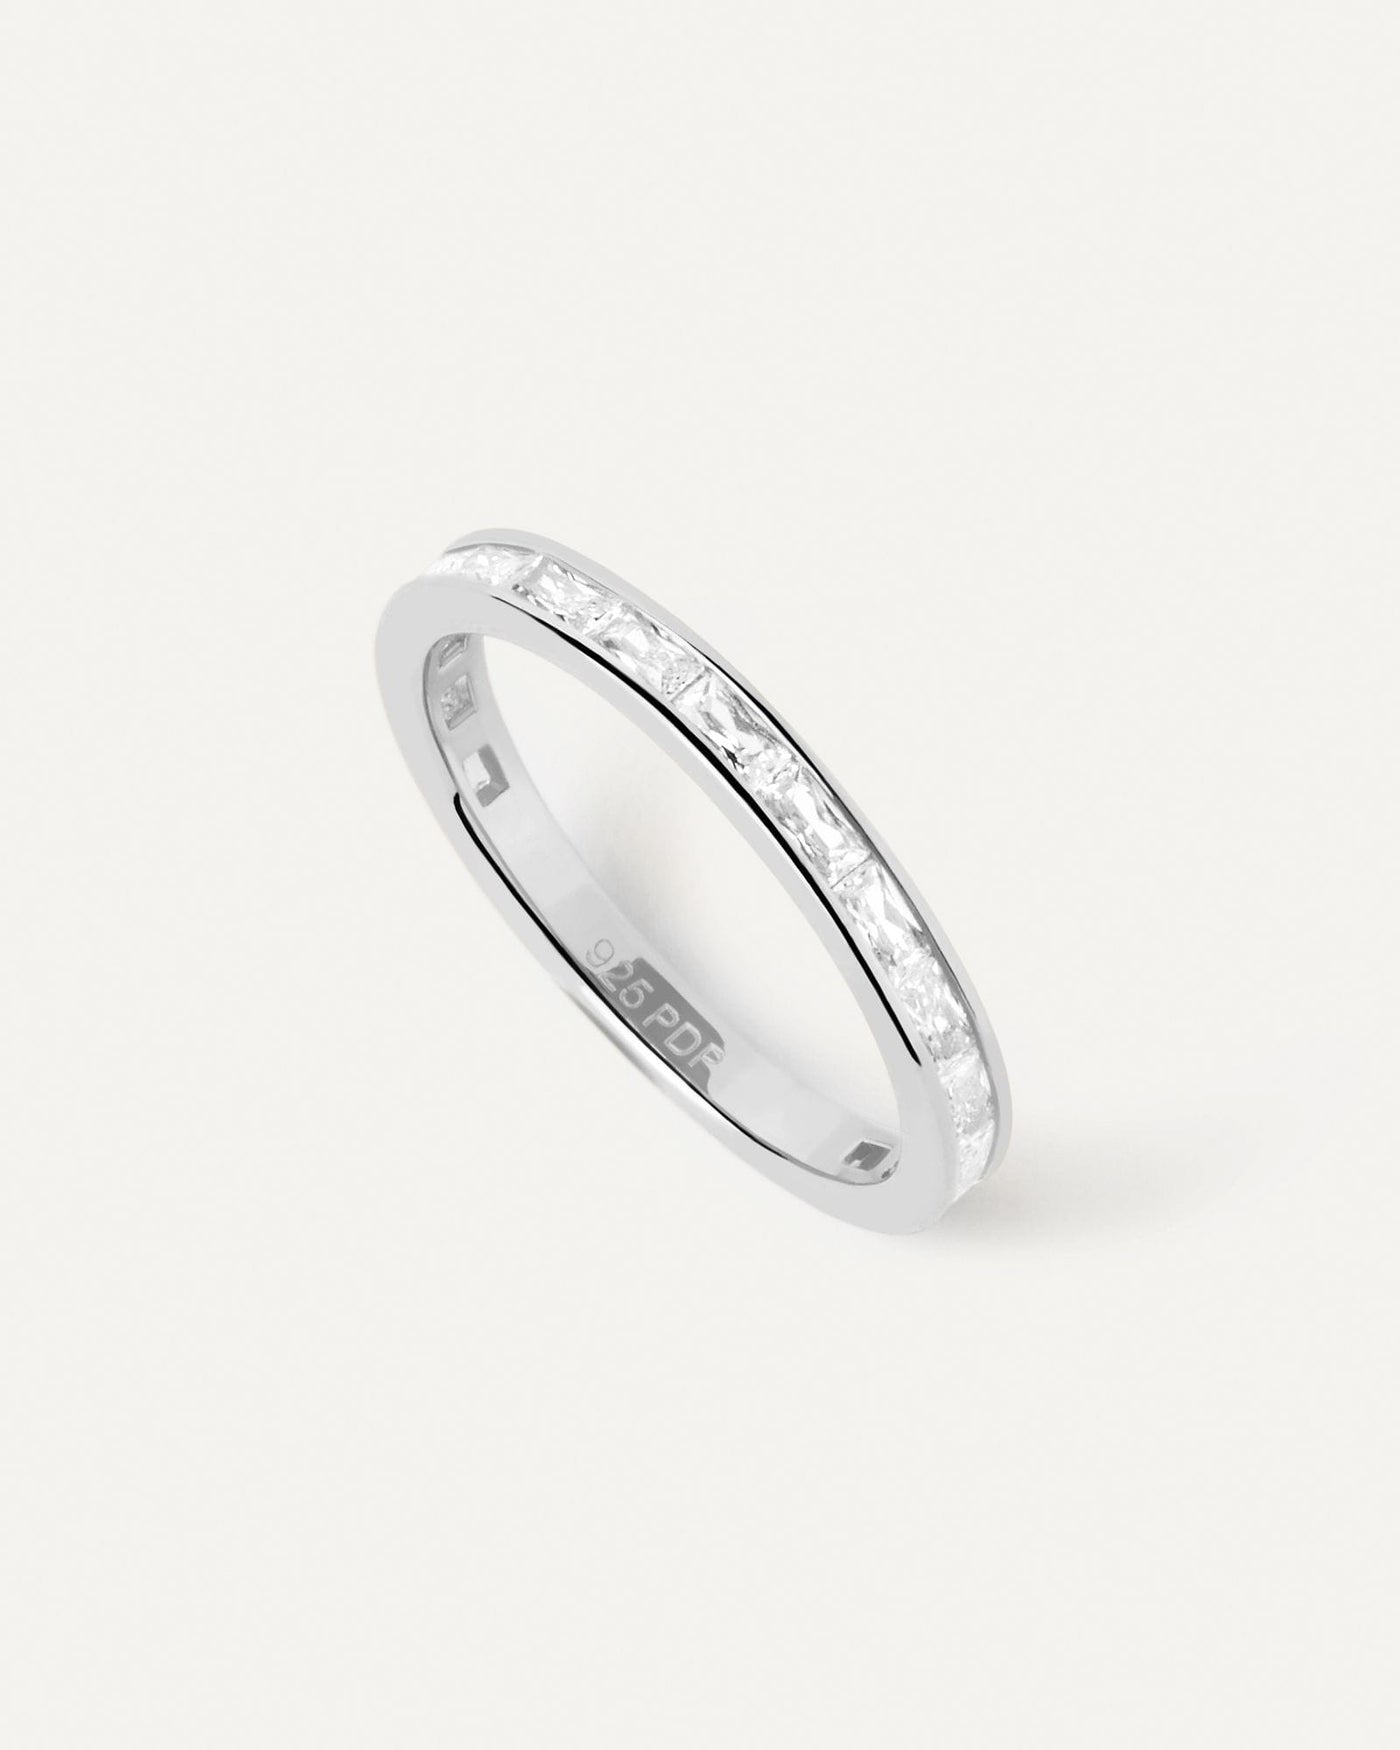 2024 Selection | Viena Silver Ring. Silver eternity ring set with rectangular cut white zirconia. Get the latest arrival from PDPAOLA. Place your order safely and get this Best Seller. Free Shipping.